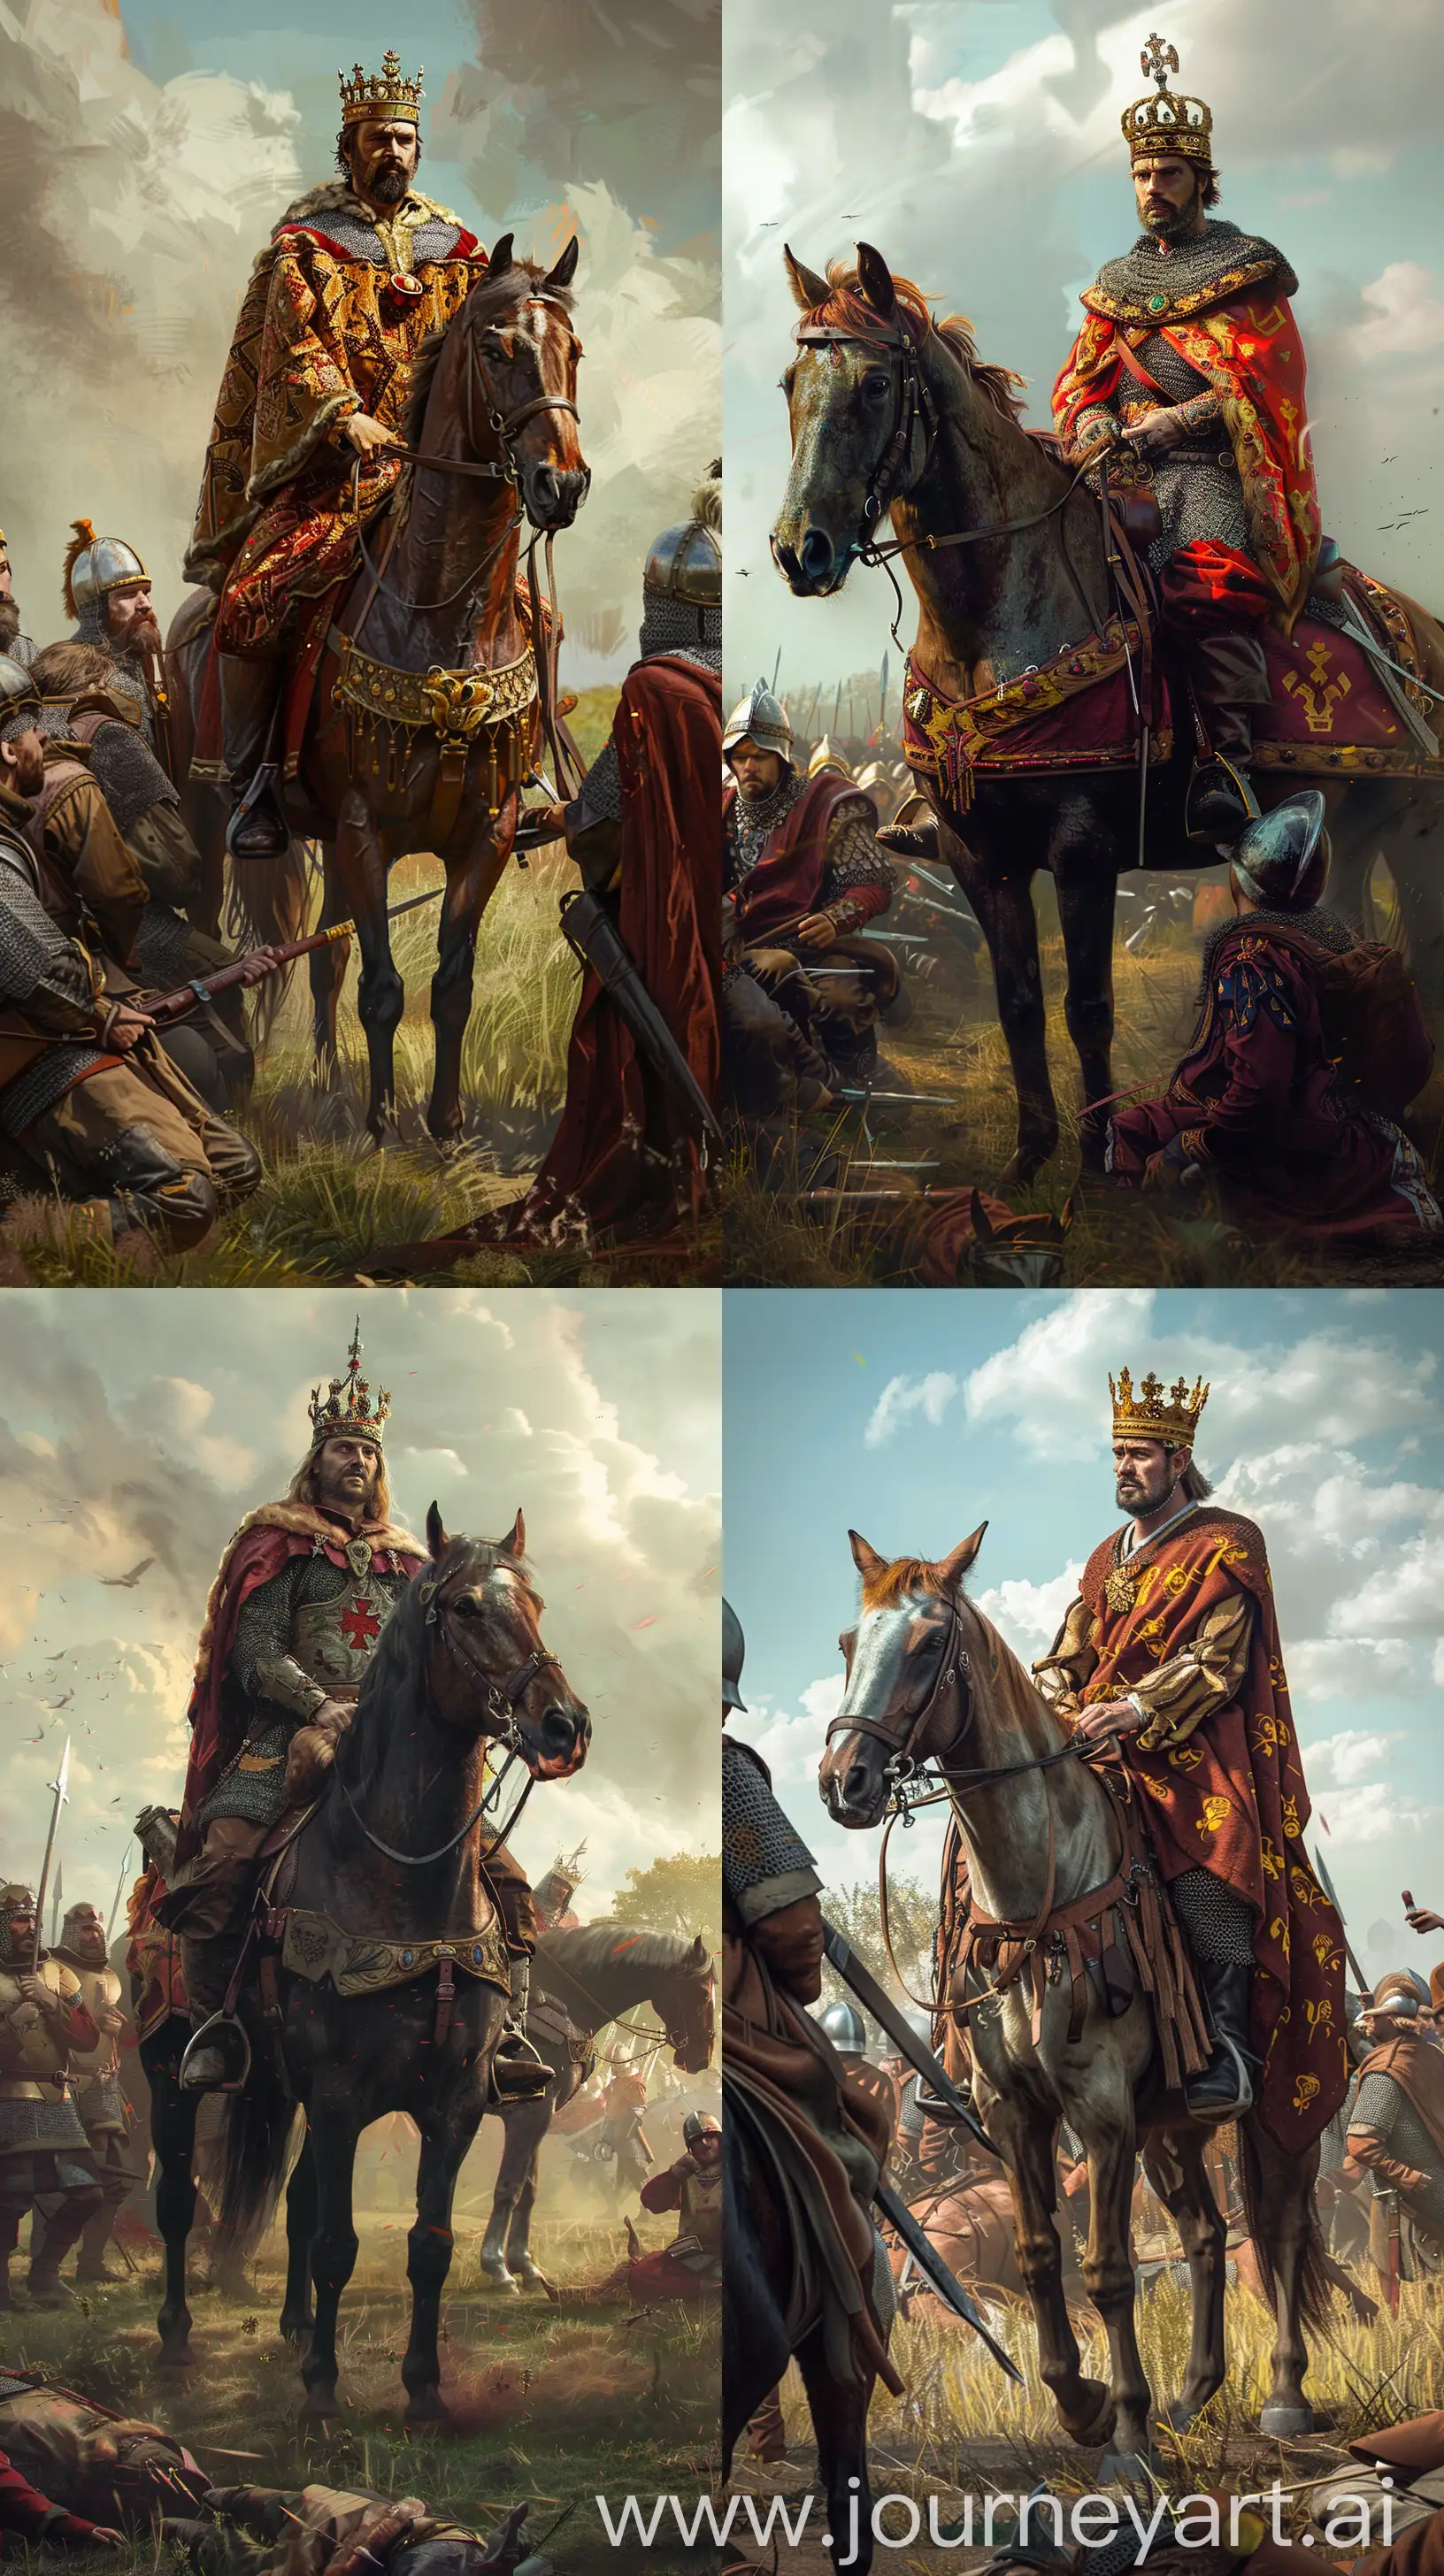 King-Richard-the-Lionheart-Addressing-His-Soldiers-on-the-Battlefield